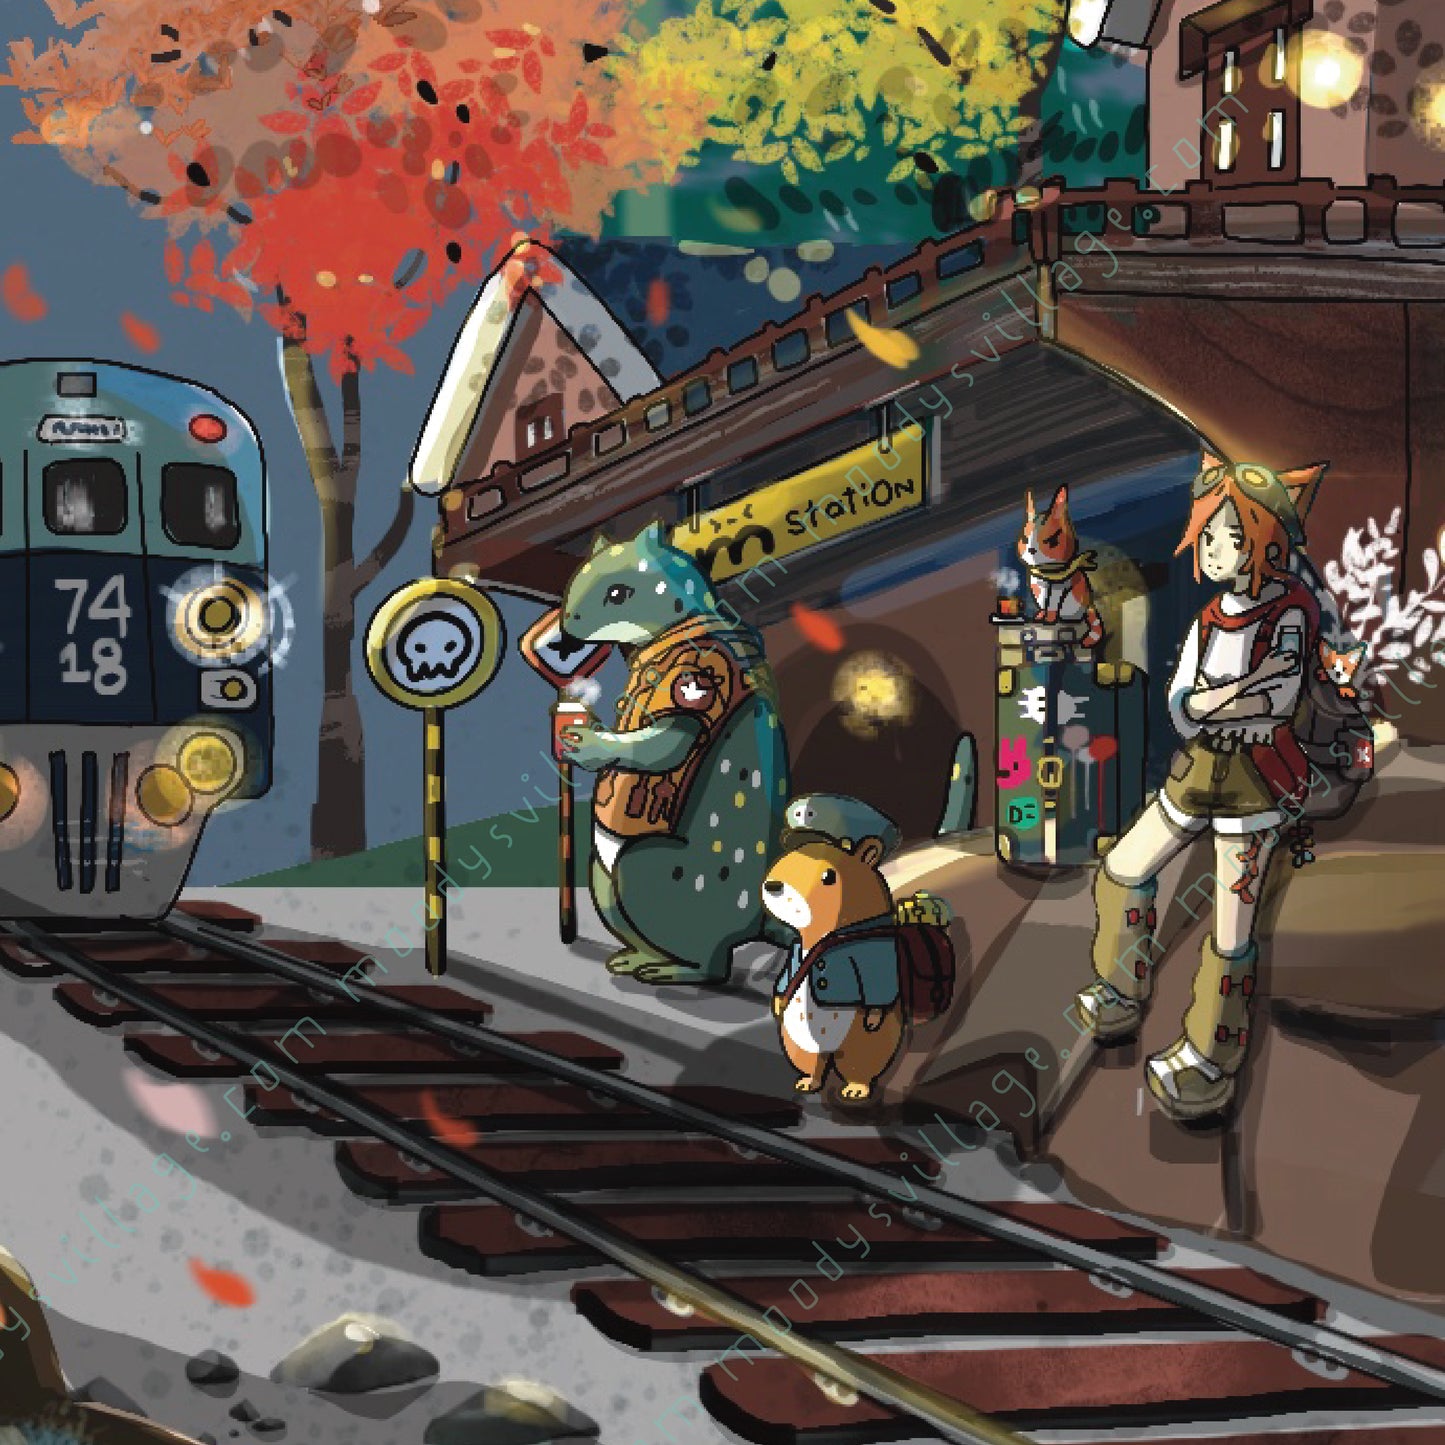 Autumn Train with Characters